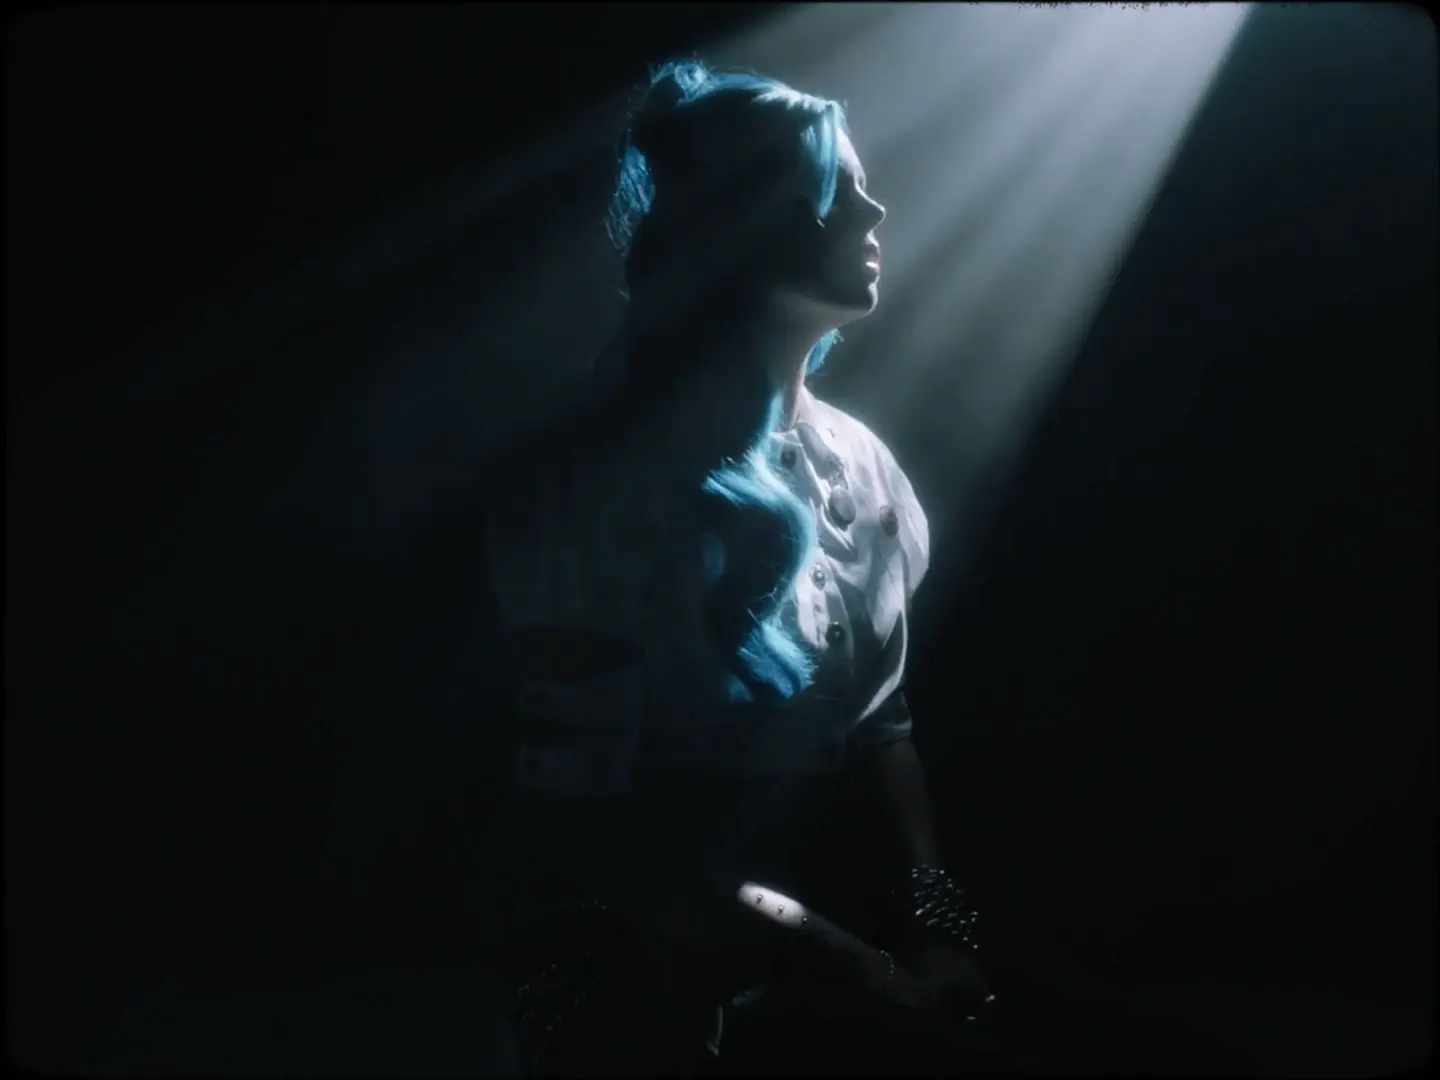 From the 'Ashes By The Morning' music video. Image features artist, Kings Elliot, sitting in a dark room as dappled light from above streams unto her face.